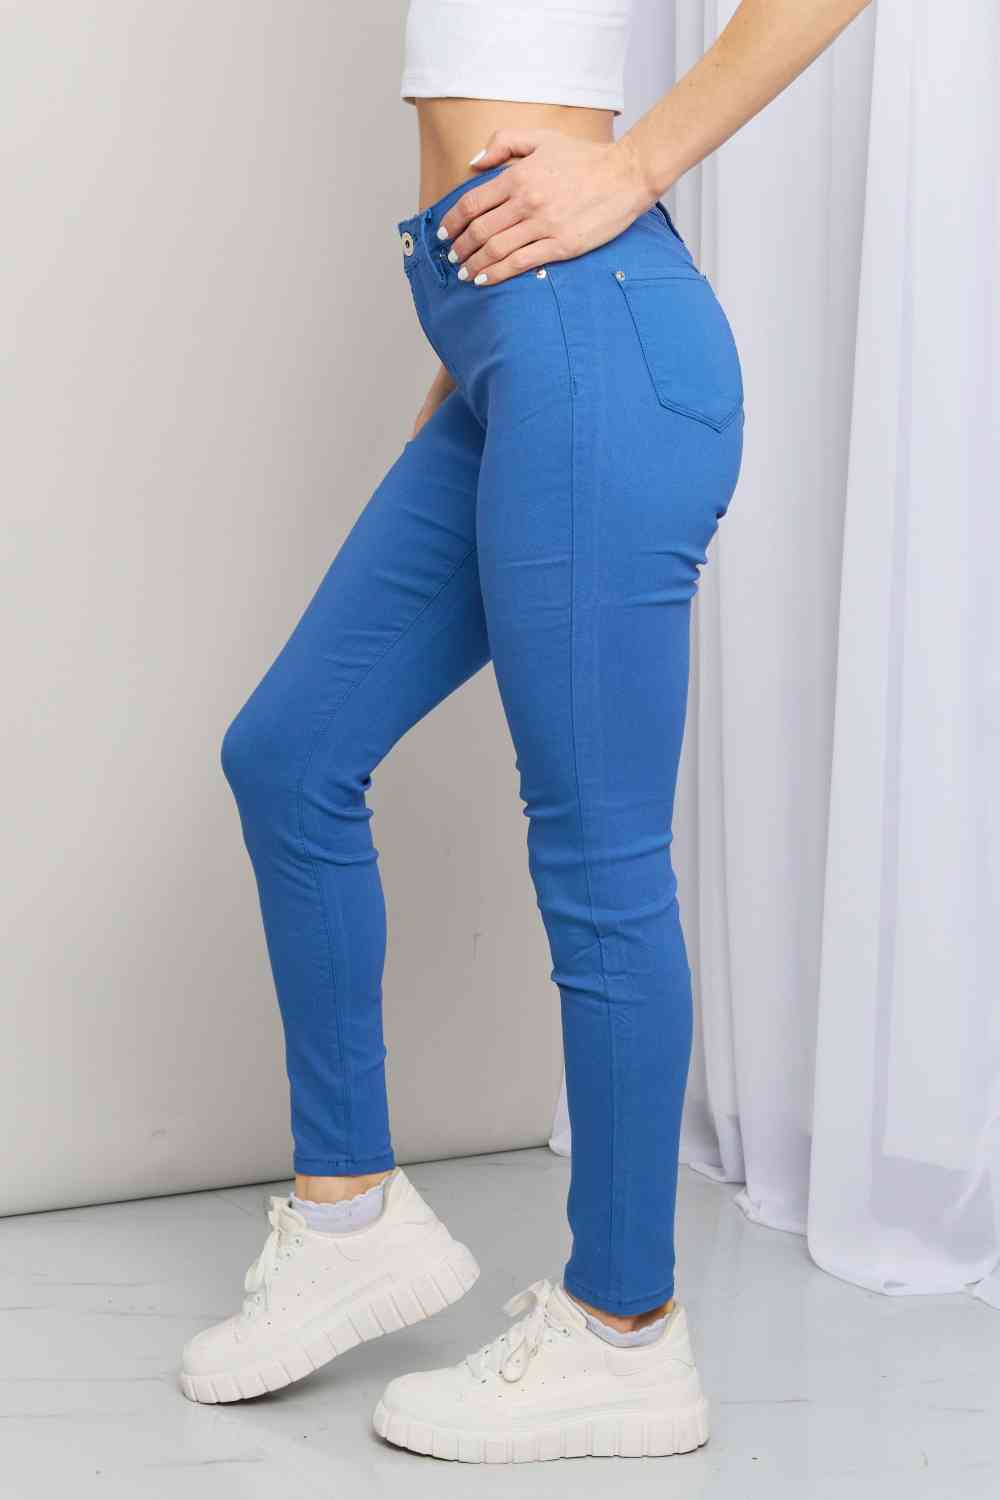 YMI Jeanswear Kate Hyper-Stretch Full Size Mid-Rise Skinny Jeans in Electric Blue - AFFORDABLE MARKET